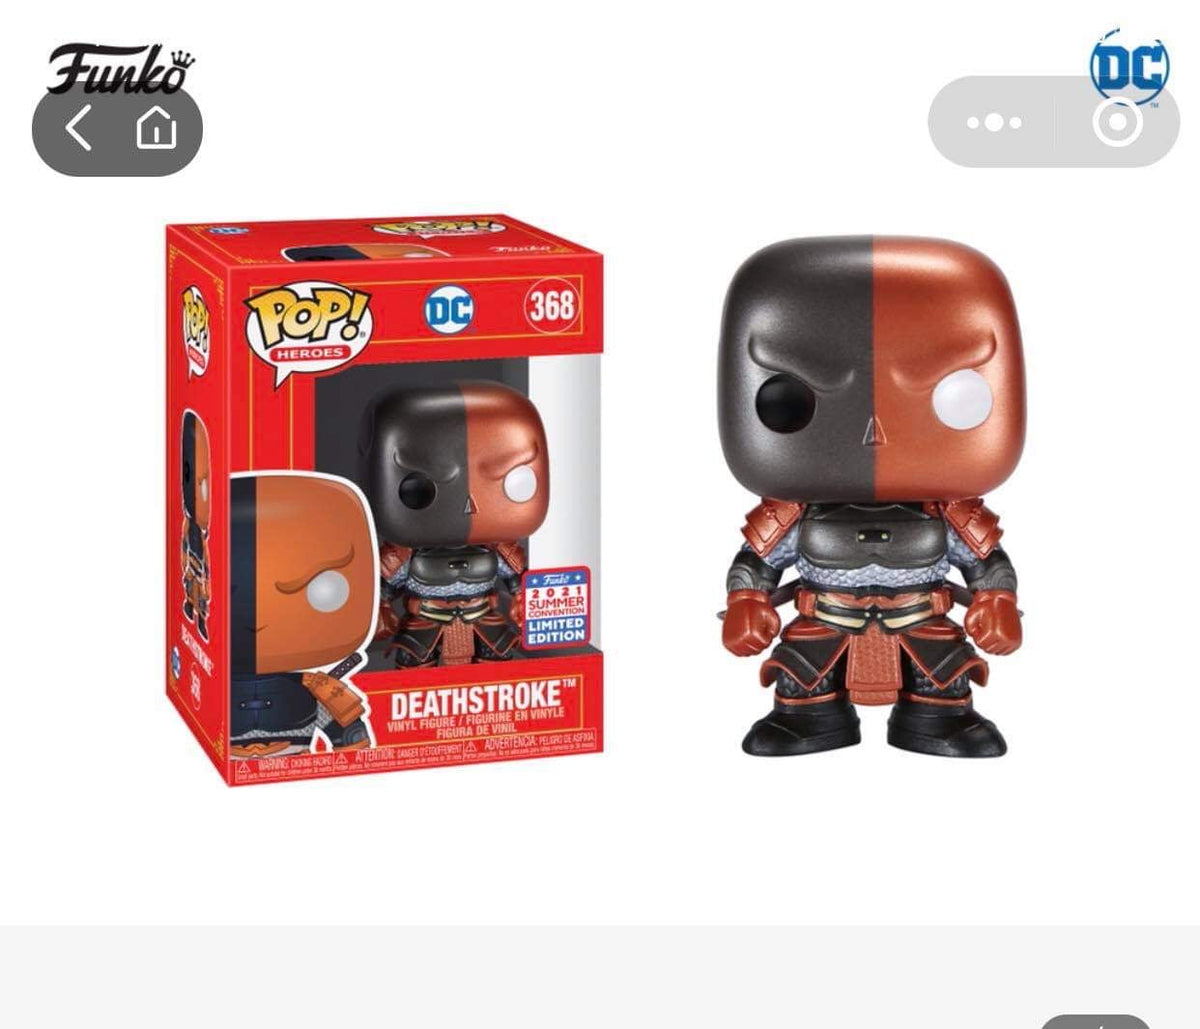 Funko Pop D.C Deathstroke (China Exclusive)